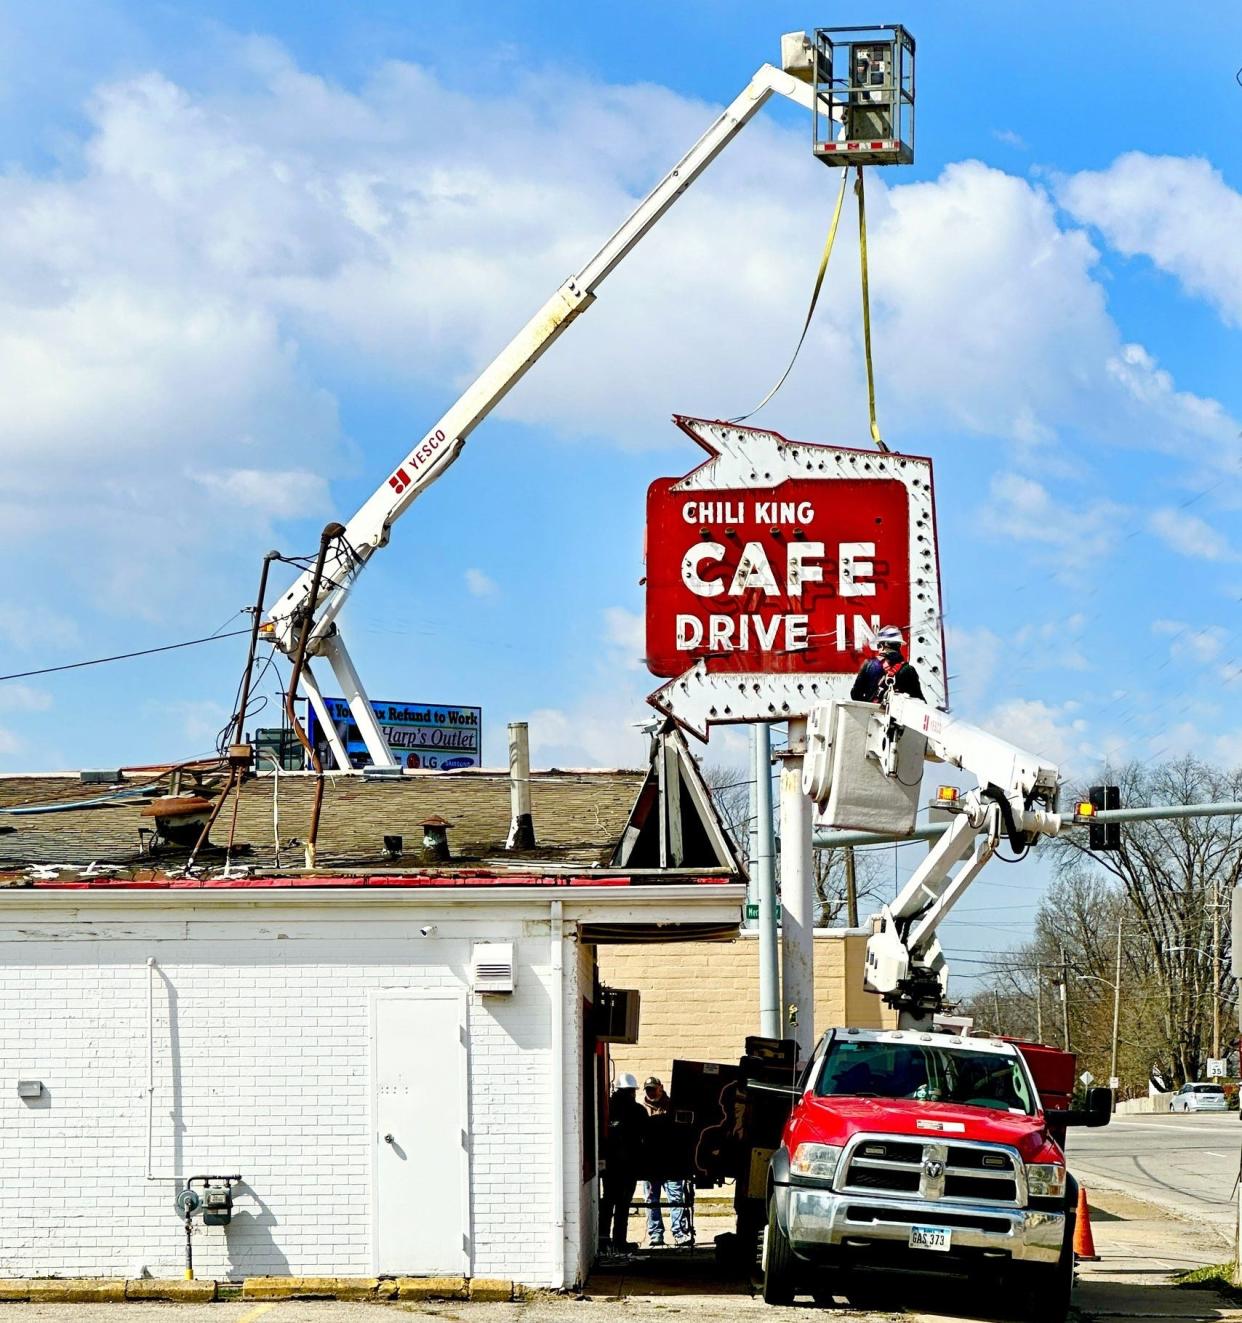 George the Chili King's neon sign comes down Thursday, March 28 at 5722 Hickman Rd.